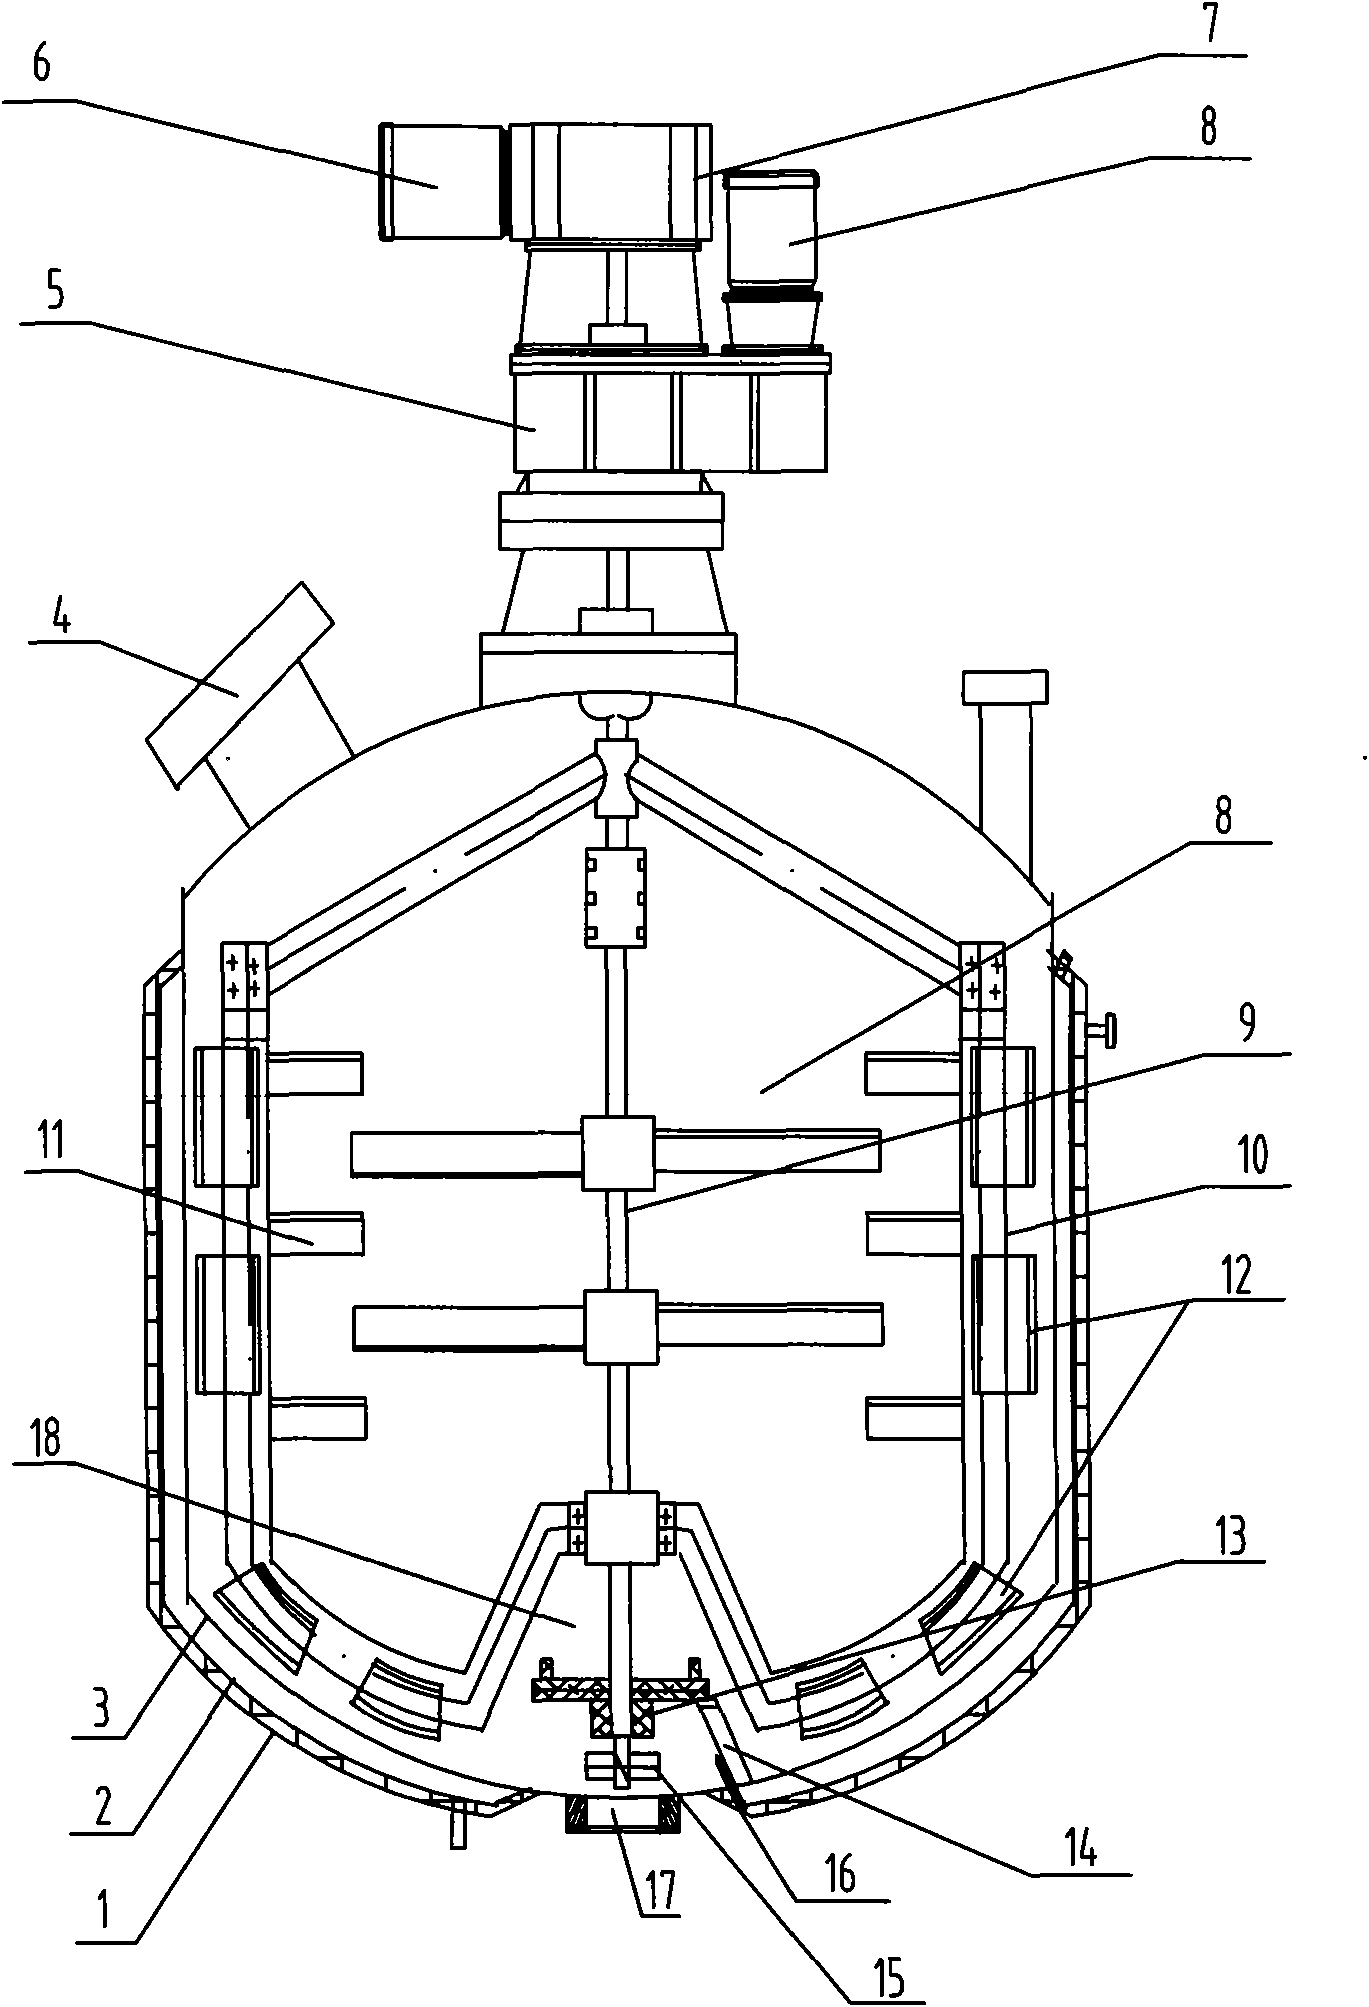 Combined stirred tank reactor